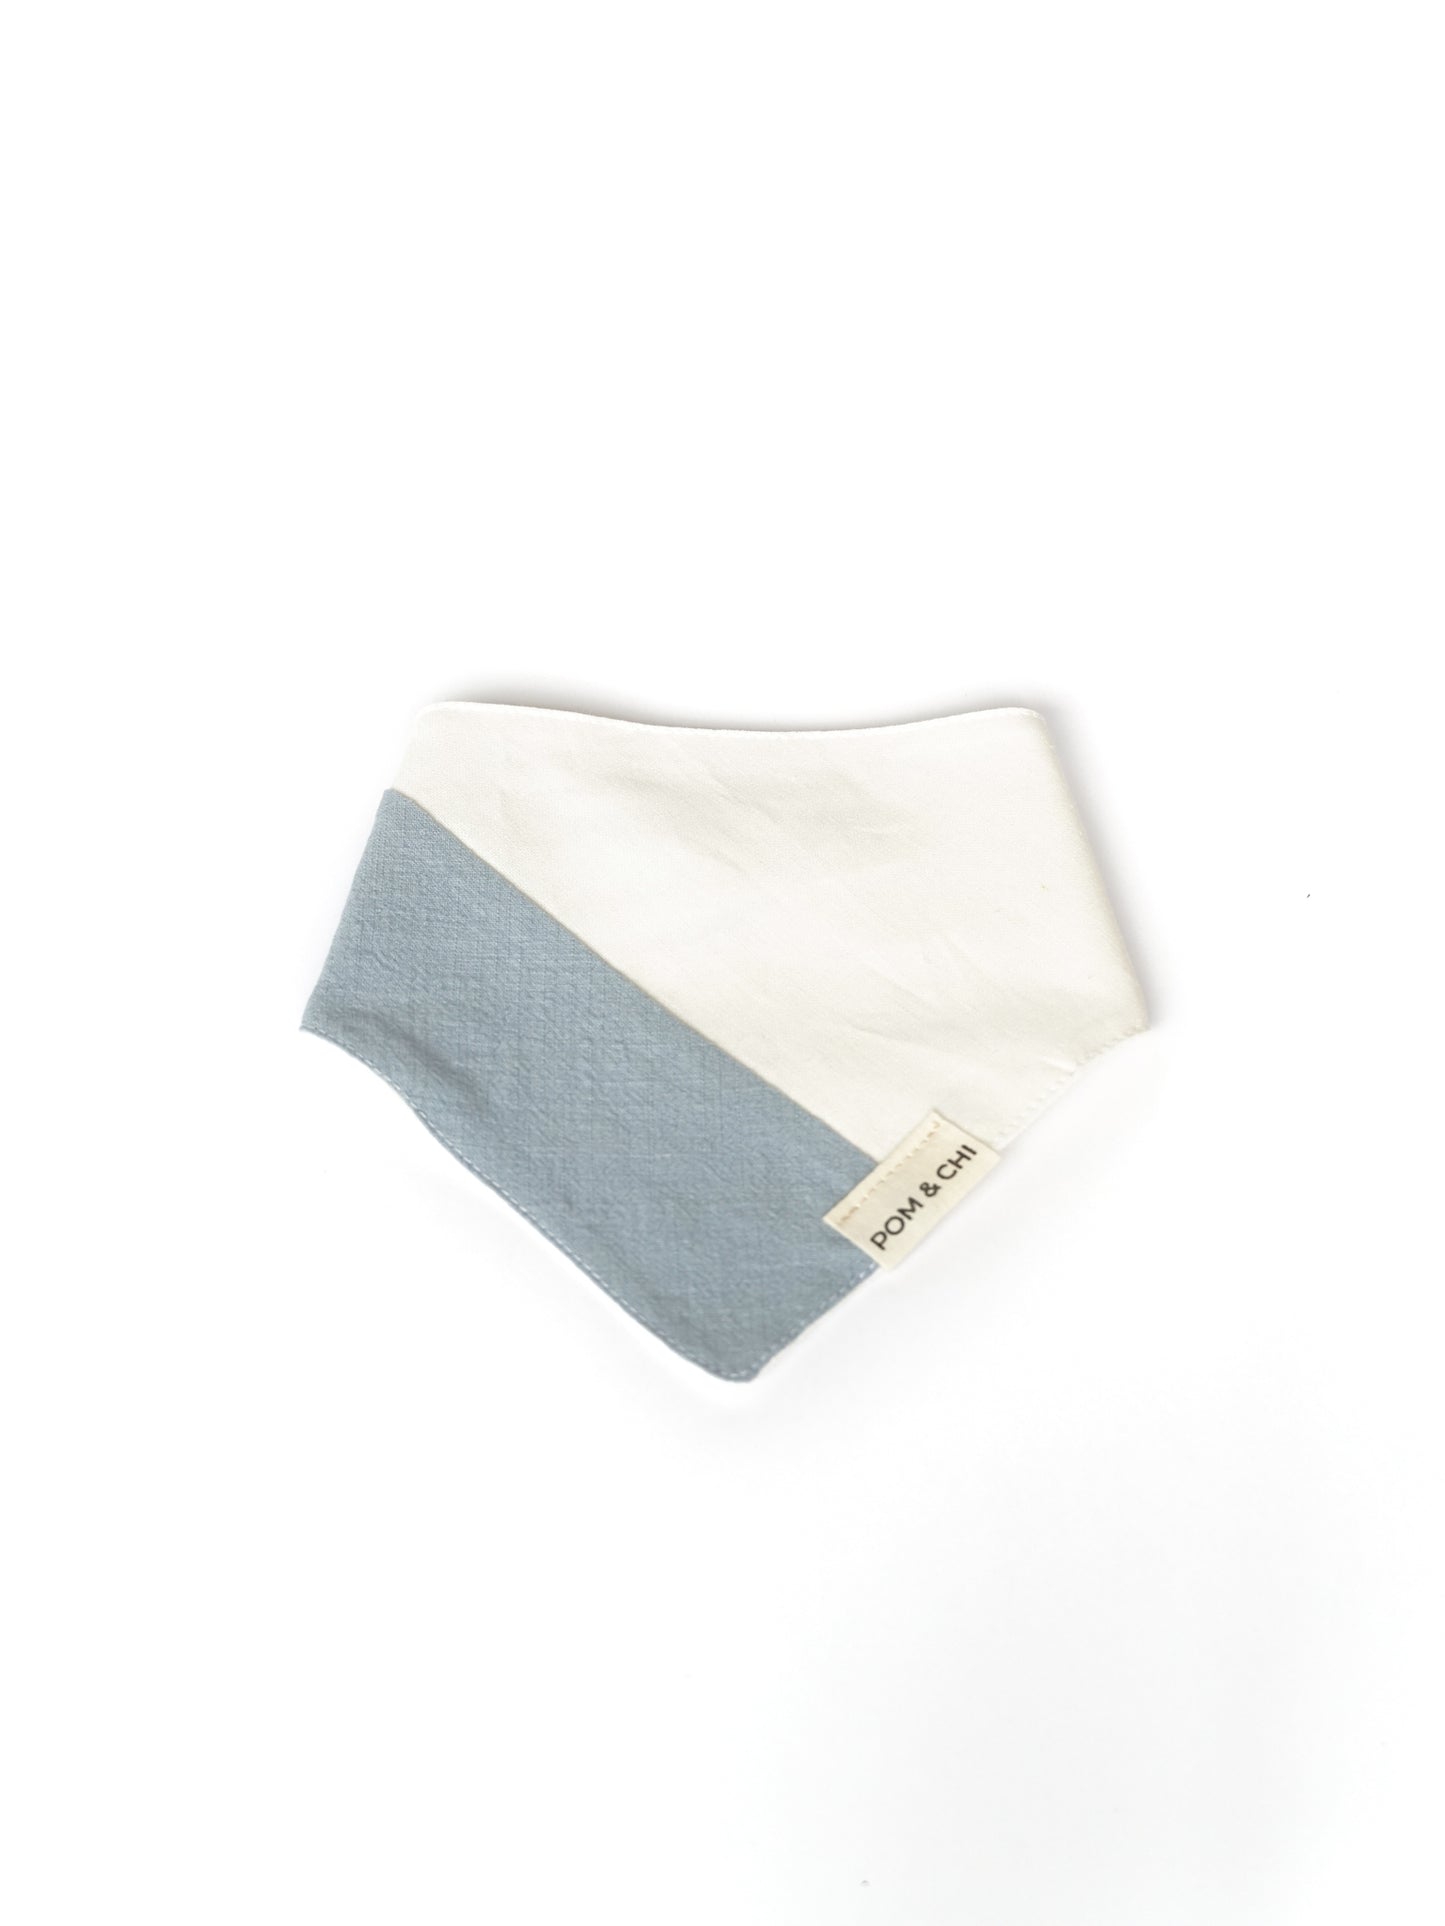 Pom & Chi Sustainable Small Dog Bandana Spring In My Step in Sky Blue